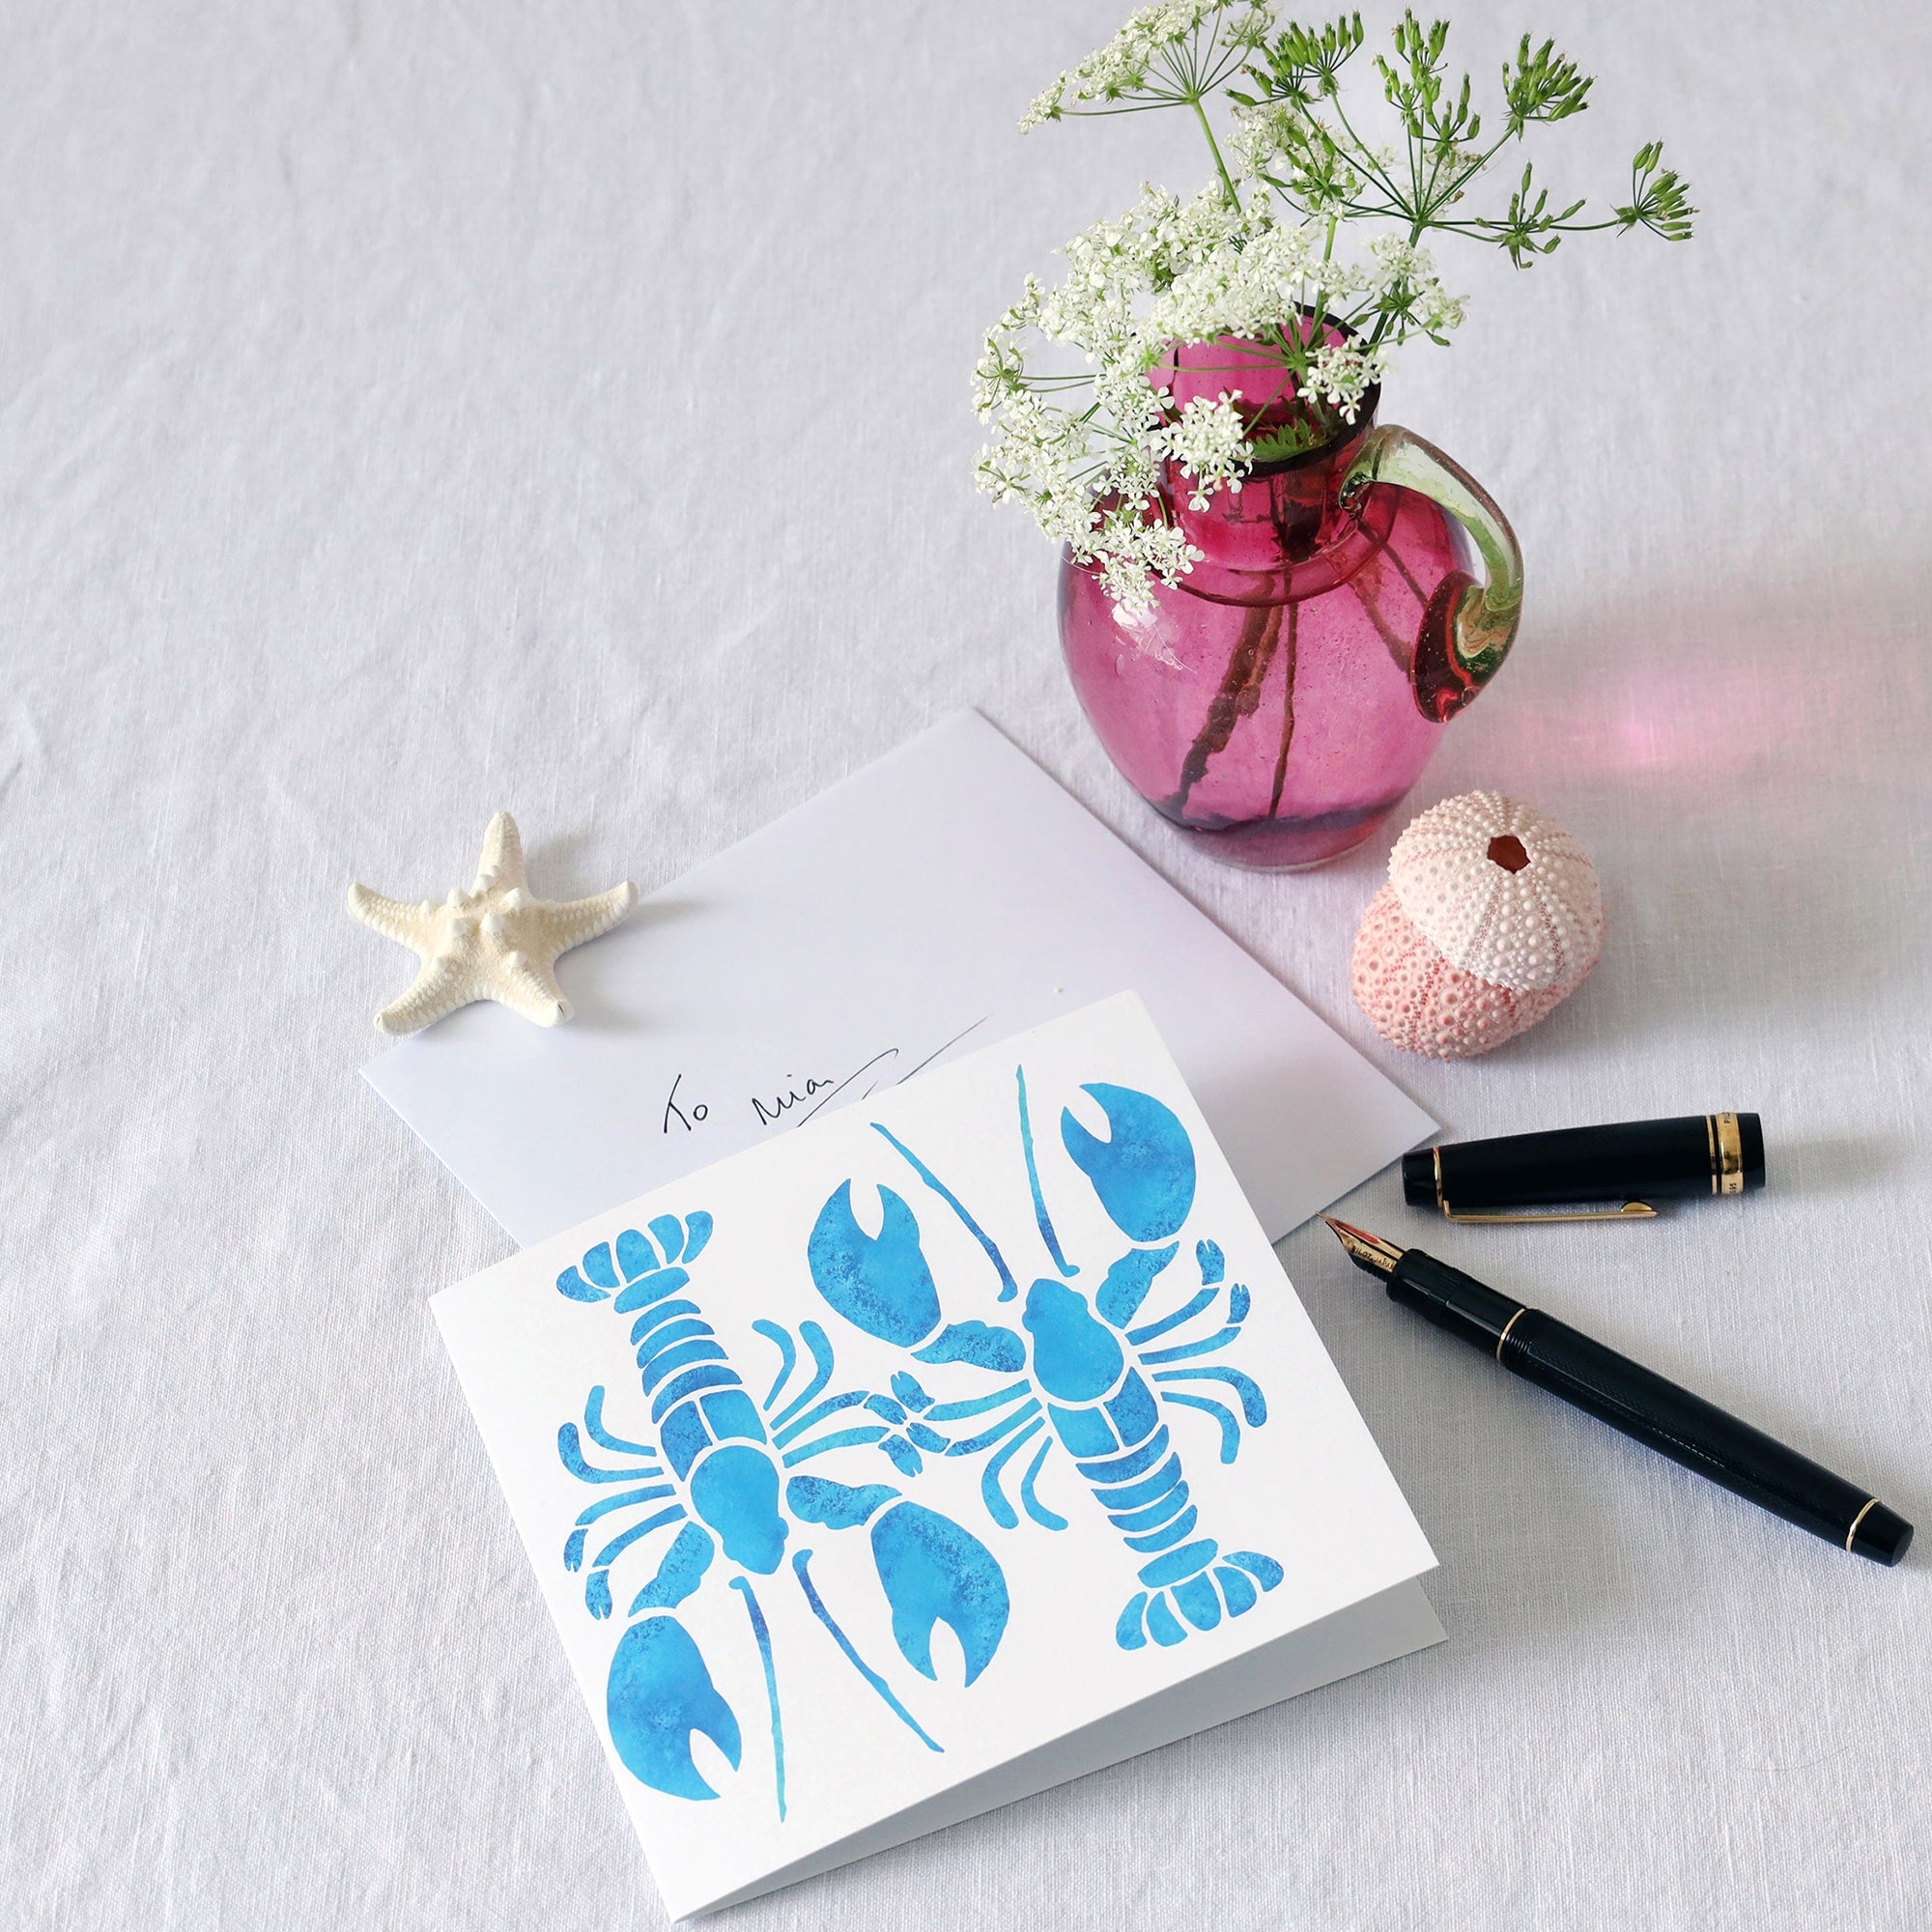 greeting card with 2 turquoise illustrated lobsters one facing up and the other facing down, abstract and filled with a mottled blue effect on a white background lying on a white table cloth with a fountain pen, hand written envelope shells and a small cranberry glass jug with wild flowers in